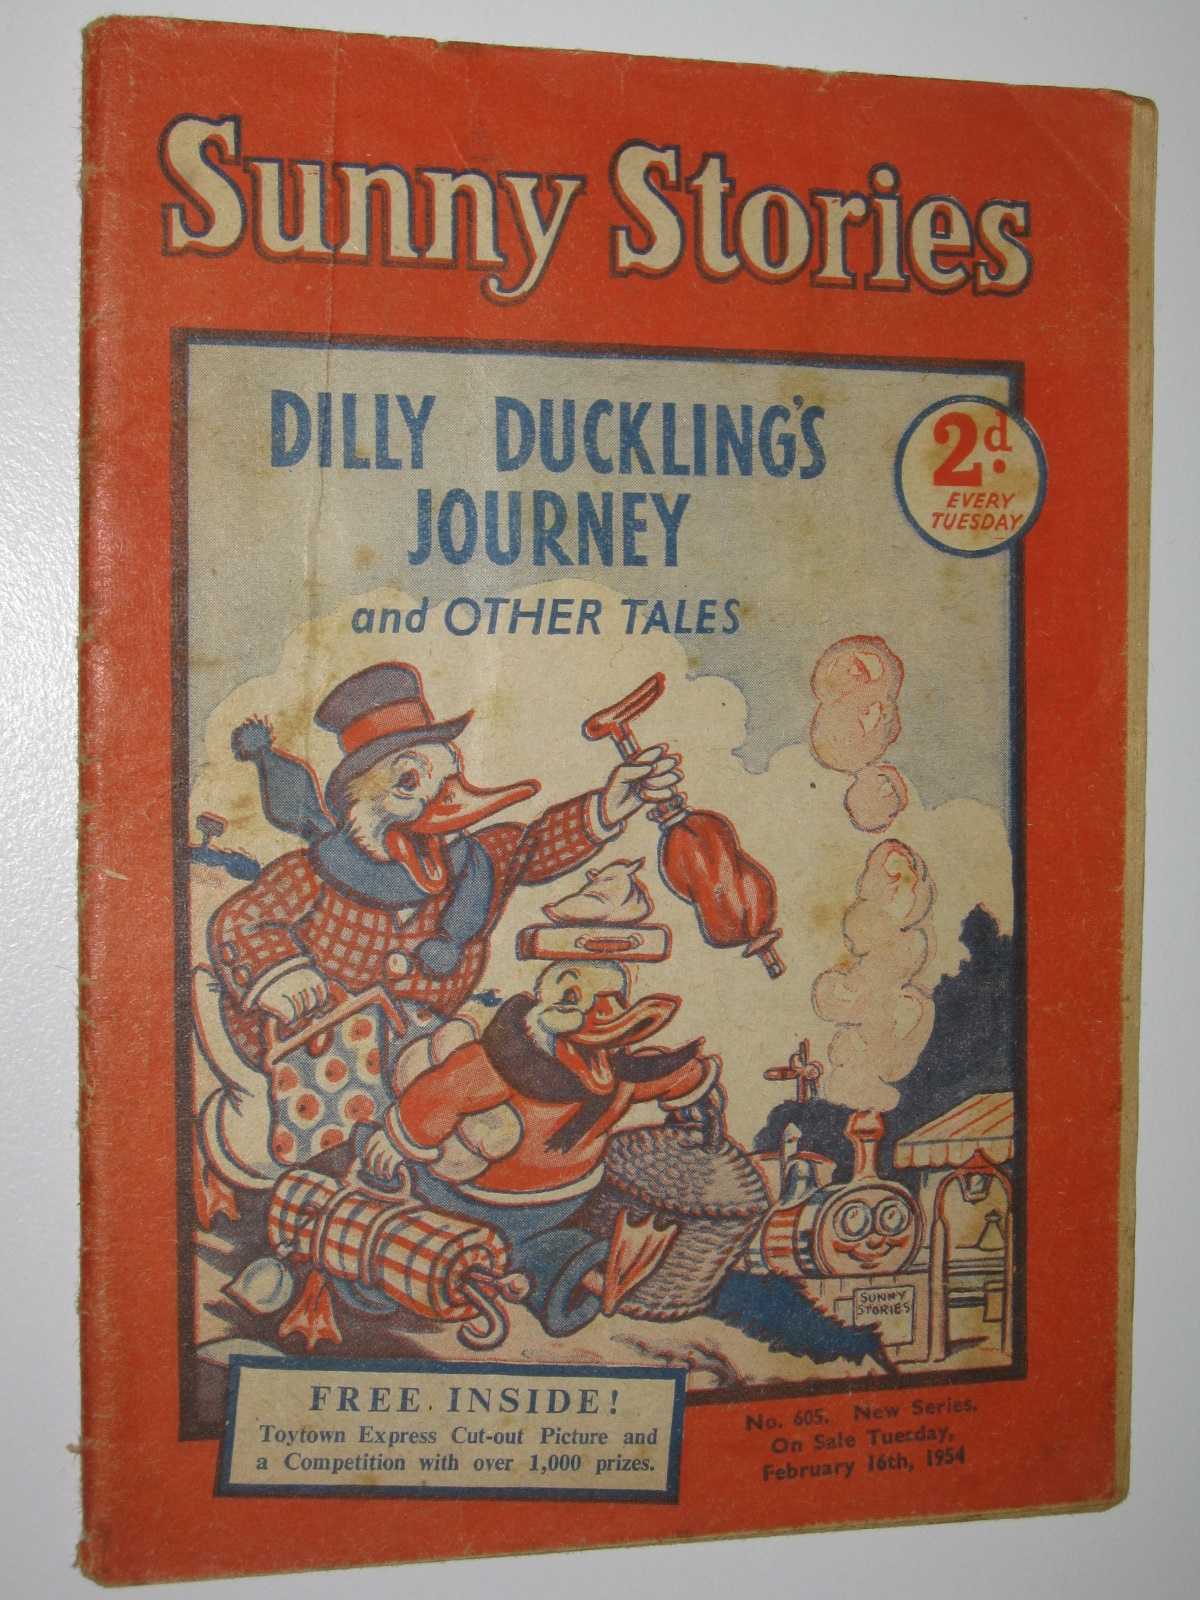 Dilly　Series　Other　Sunny　605　No.　Stories　and　Journey　New　Duckling's　Tales